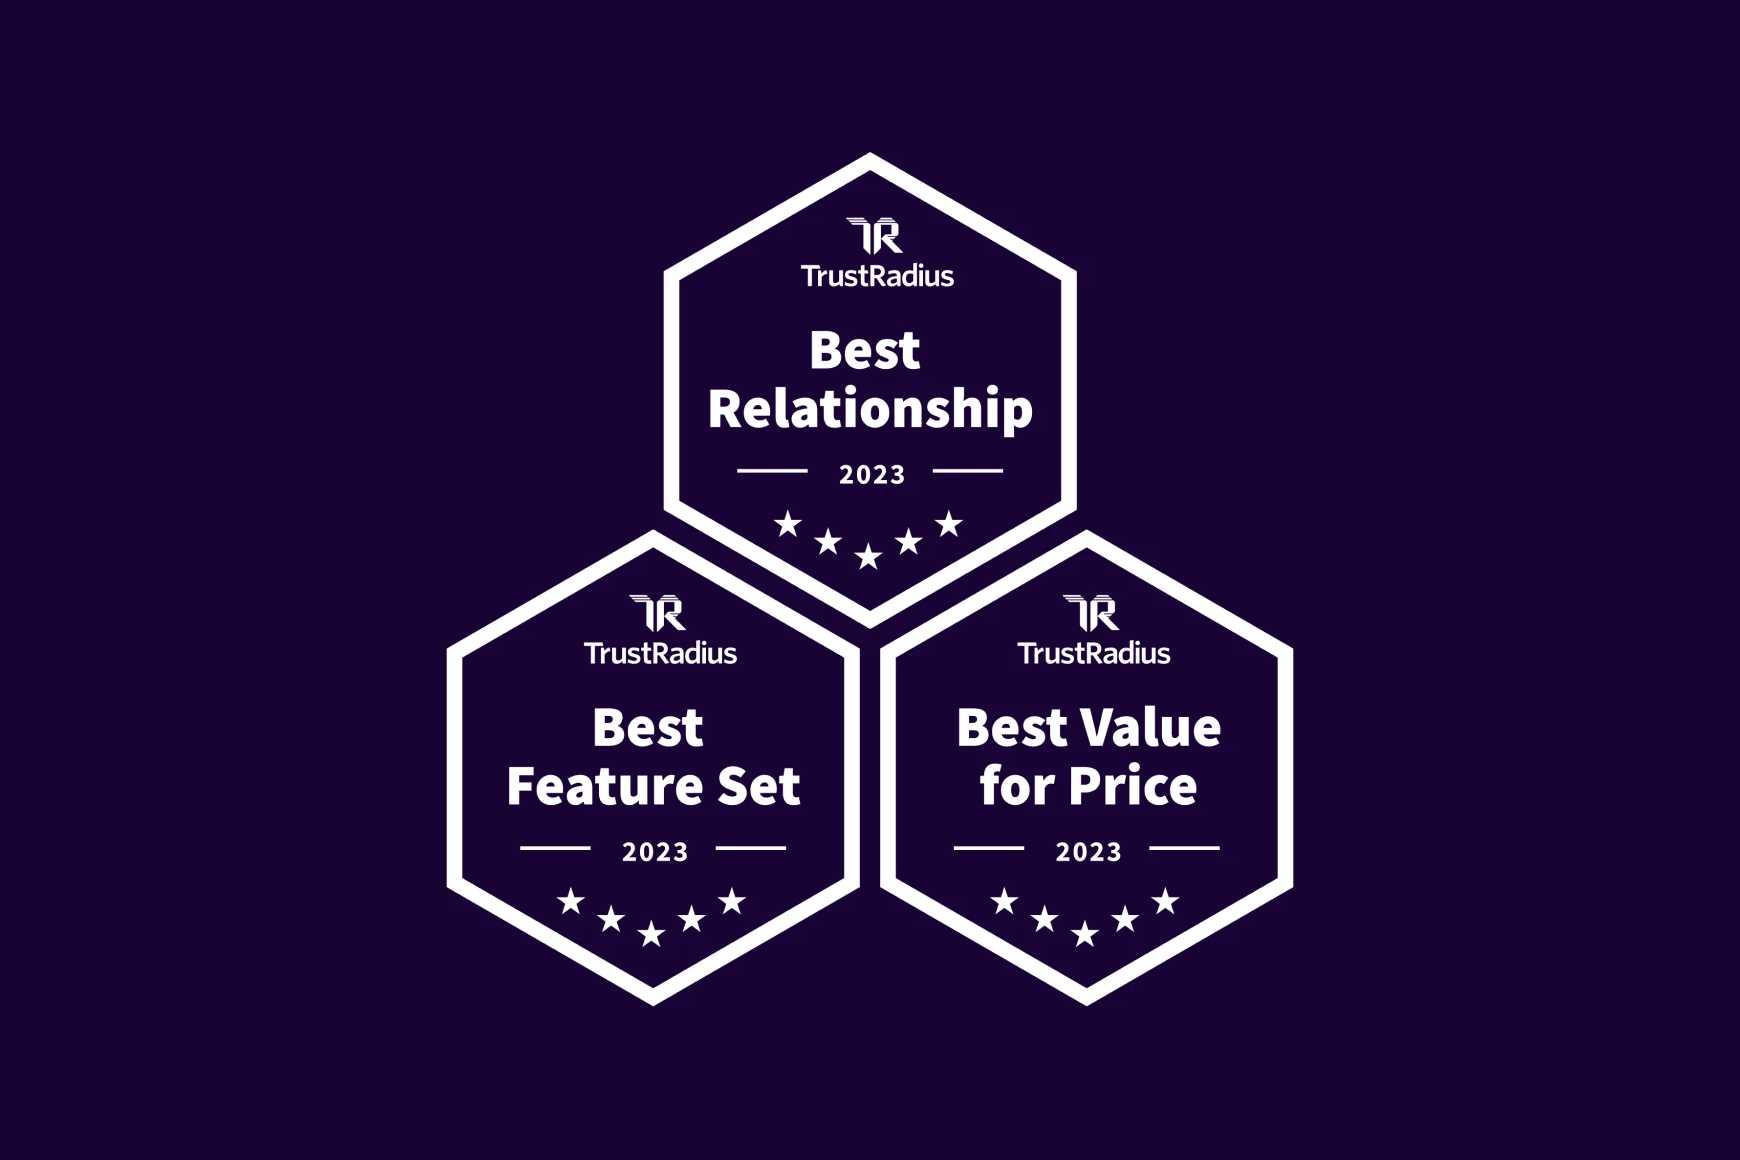 Talkdesk Earns TrustRadius 2023 Best of Awards for Relationship, Value, and Feature Set